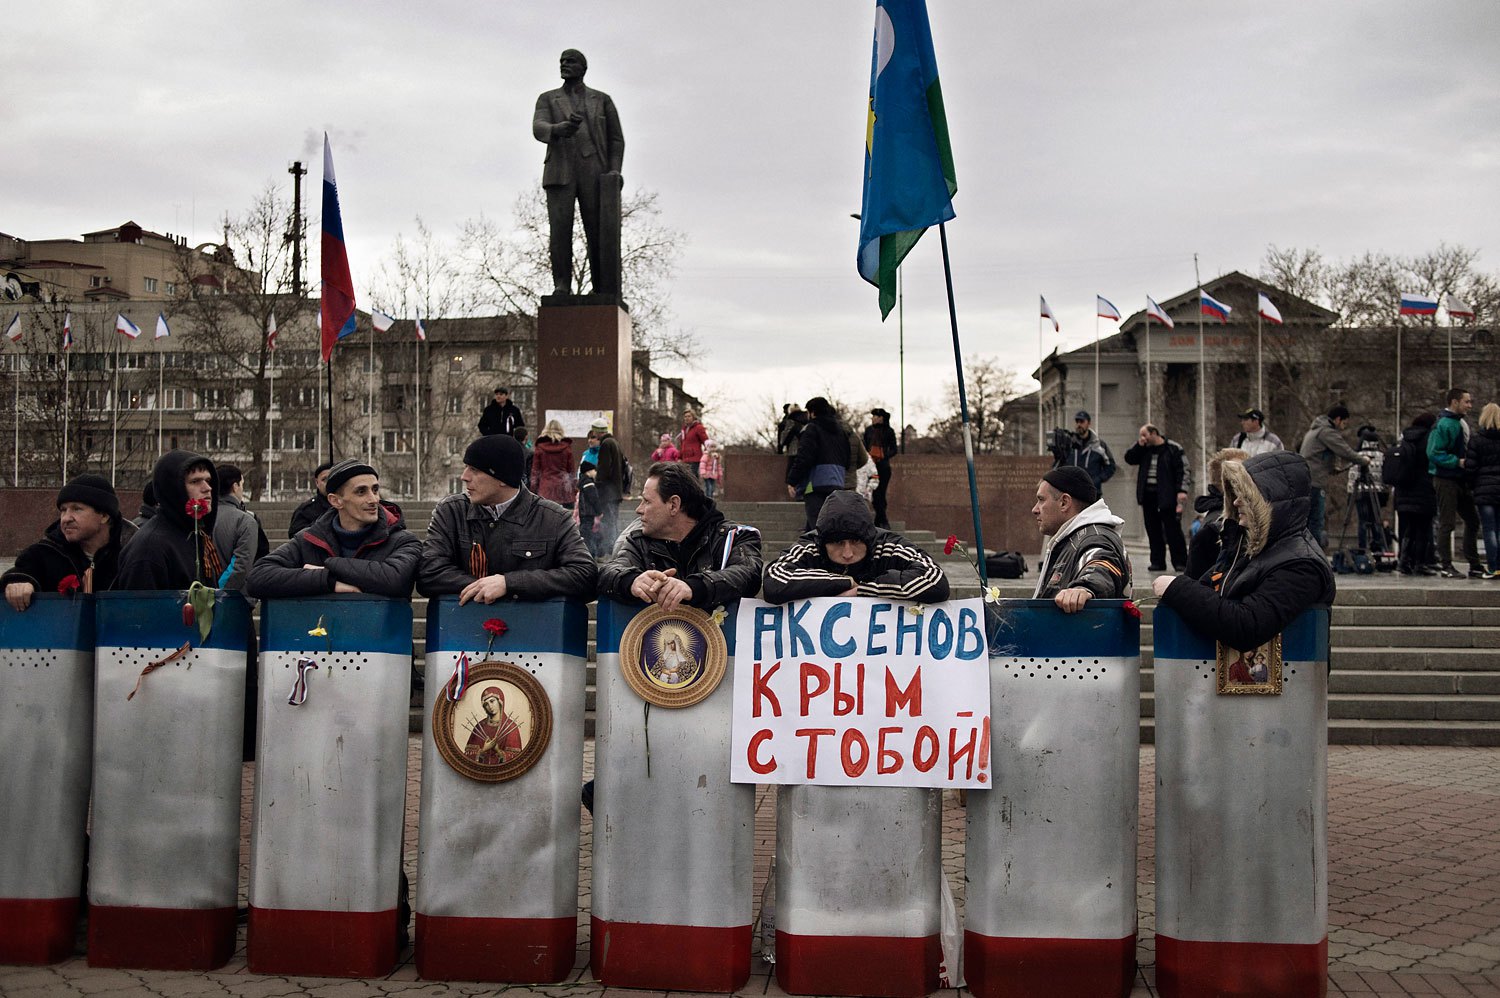 Members of a pro-Russian group stationed themselves in front of government buildings and a statue of Lenin in Simferopol on Sunday.